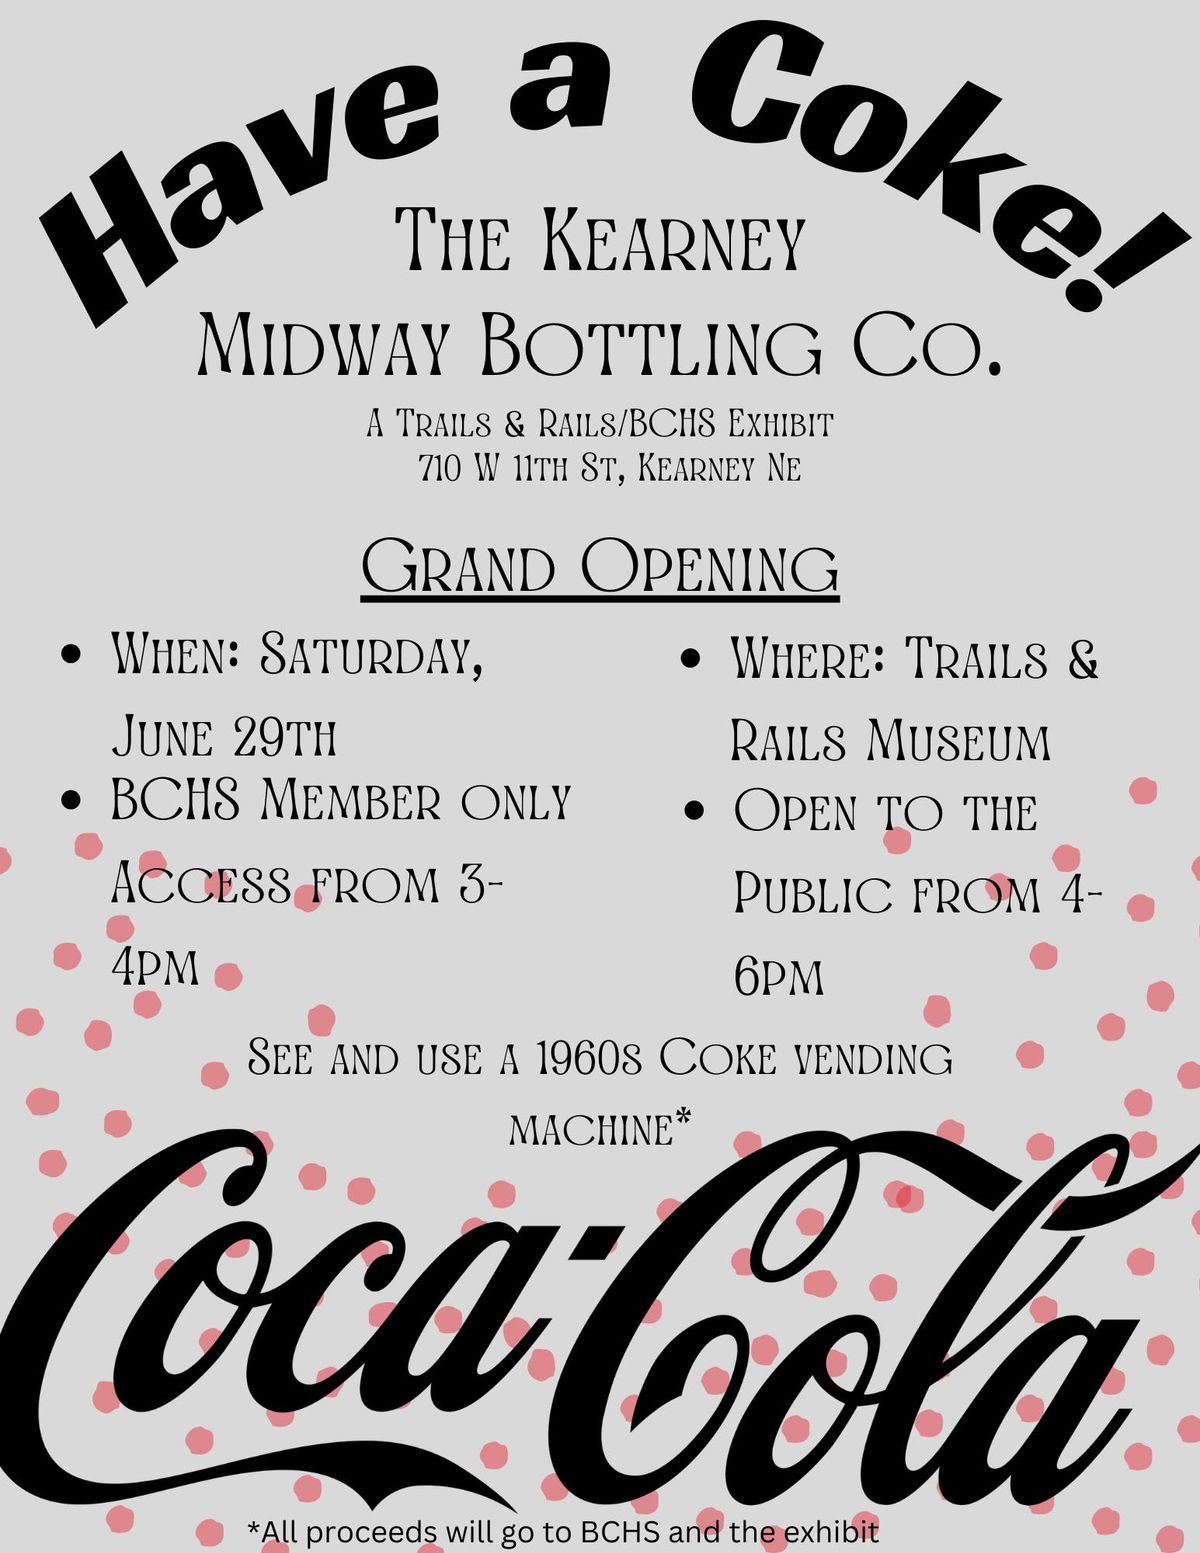 "Have a Coke!" The Kearney Midway Bottling Co. Exhibit Grand Opening